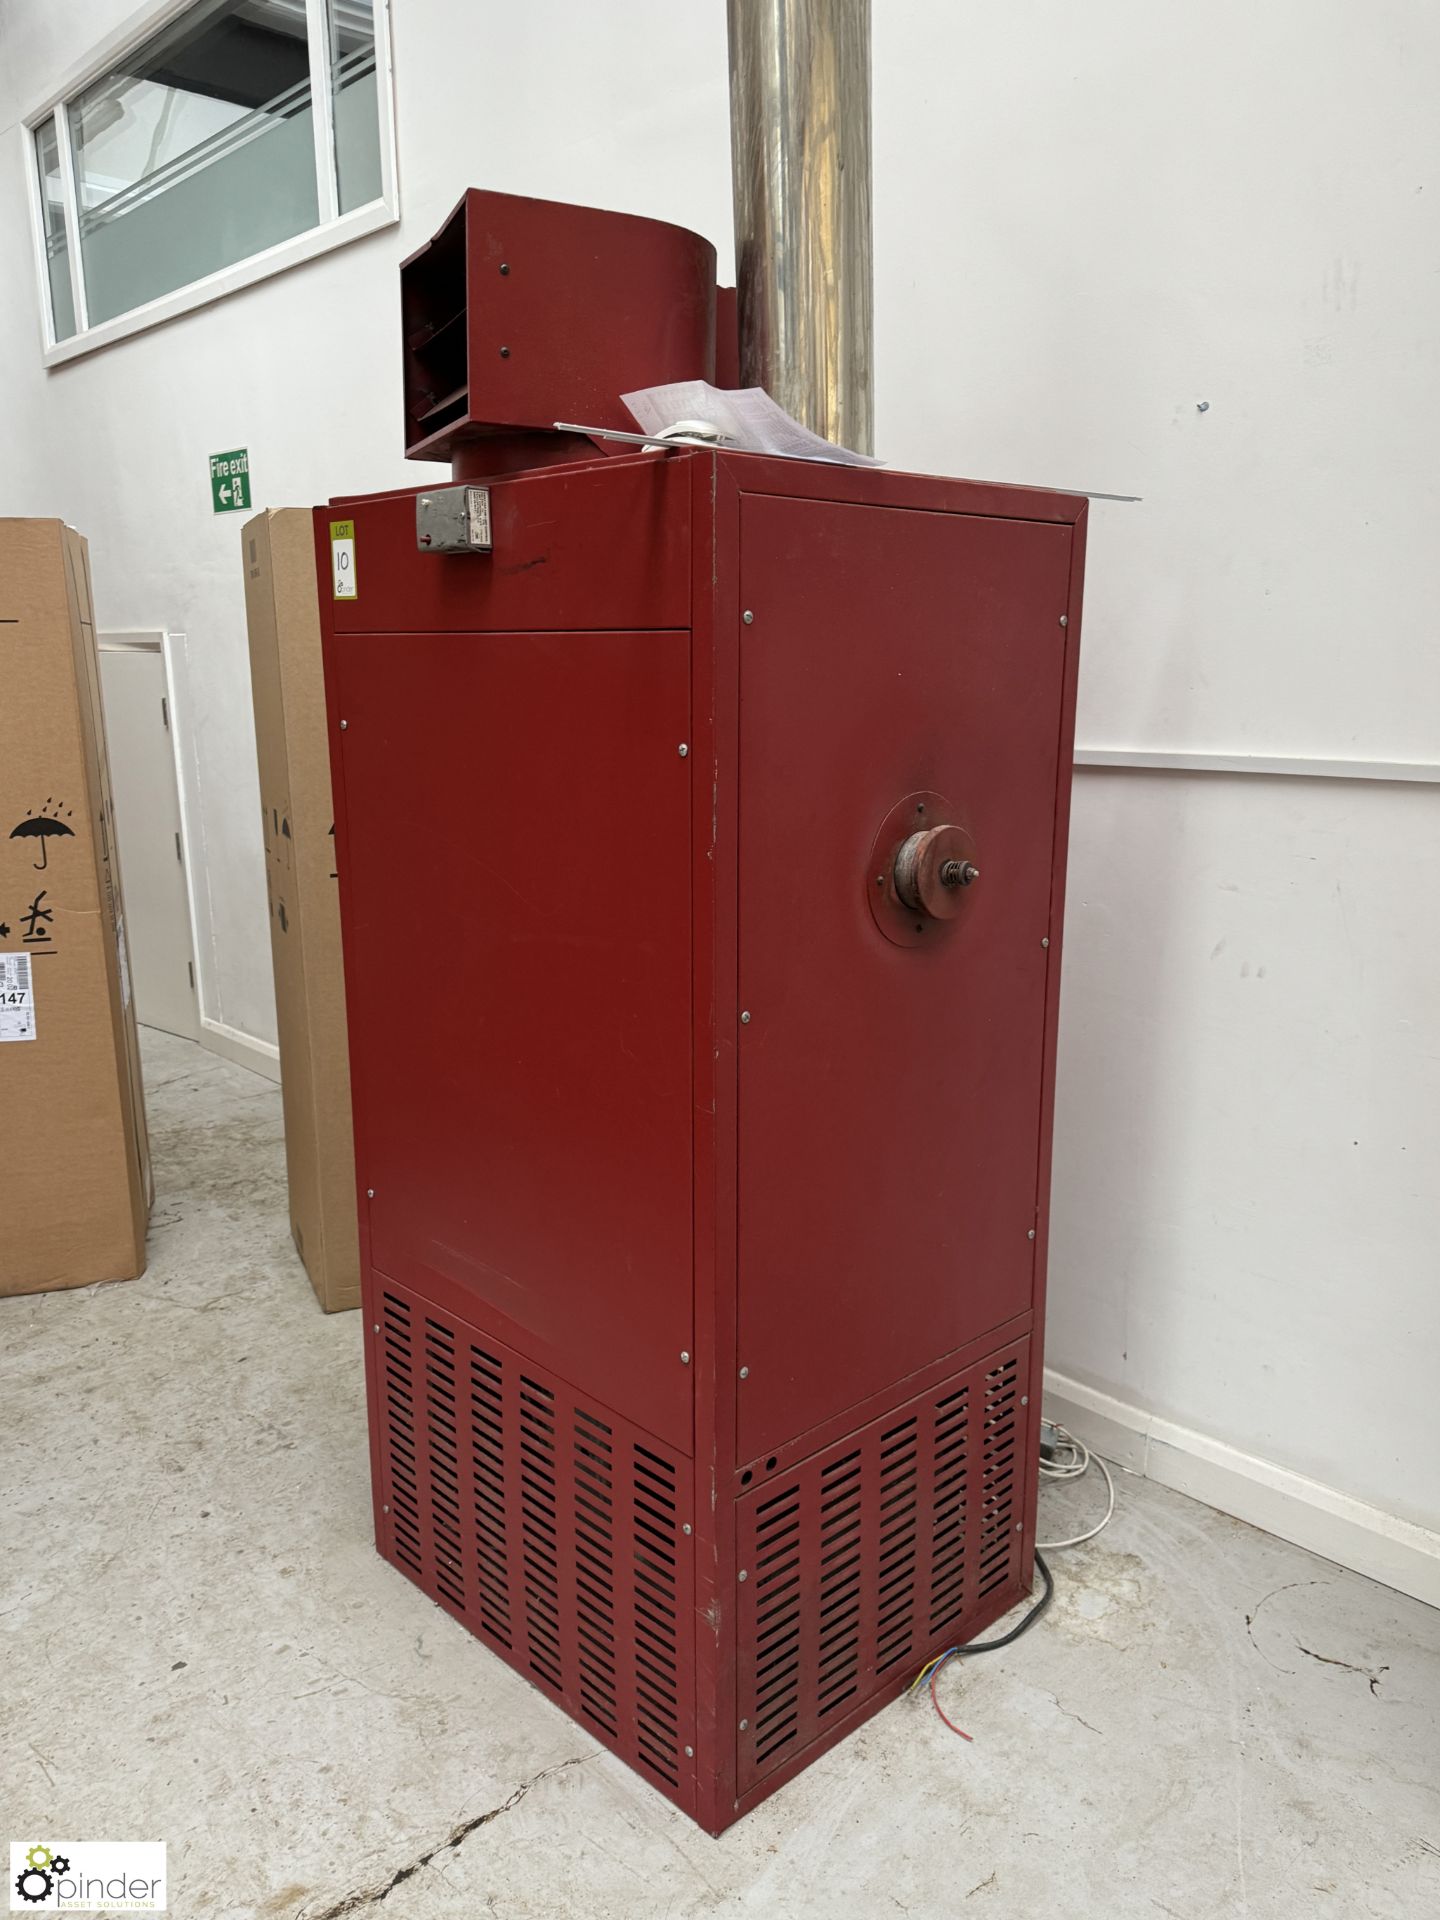 Combat 030 PGP gas fired floor standing Space Heater, burner Ecoflam BLU120, heat output 81.9kw, - Image 3 of 8